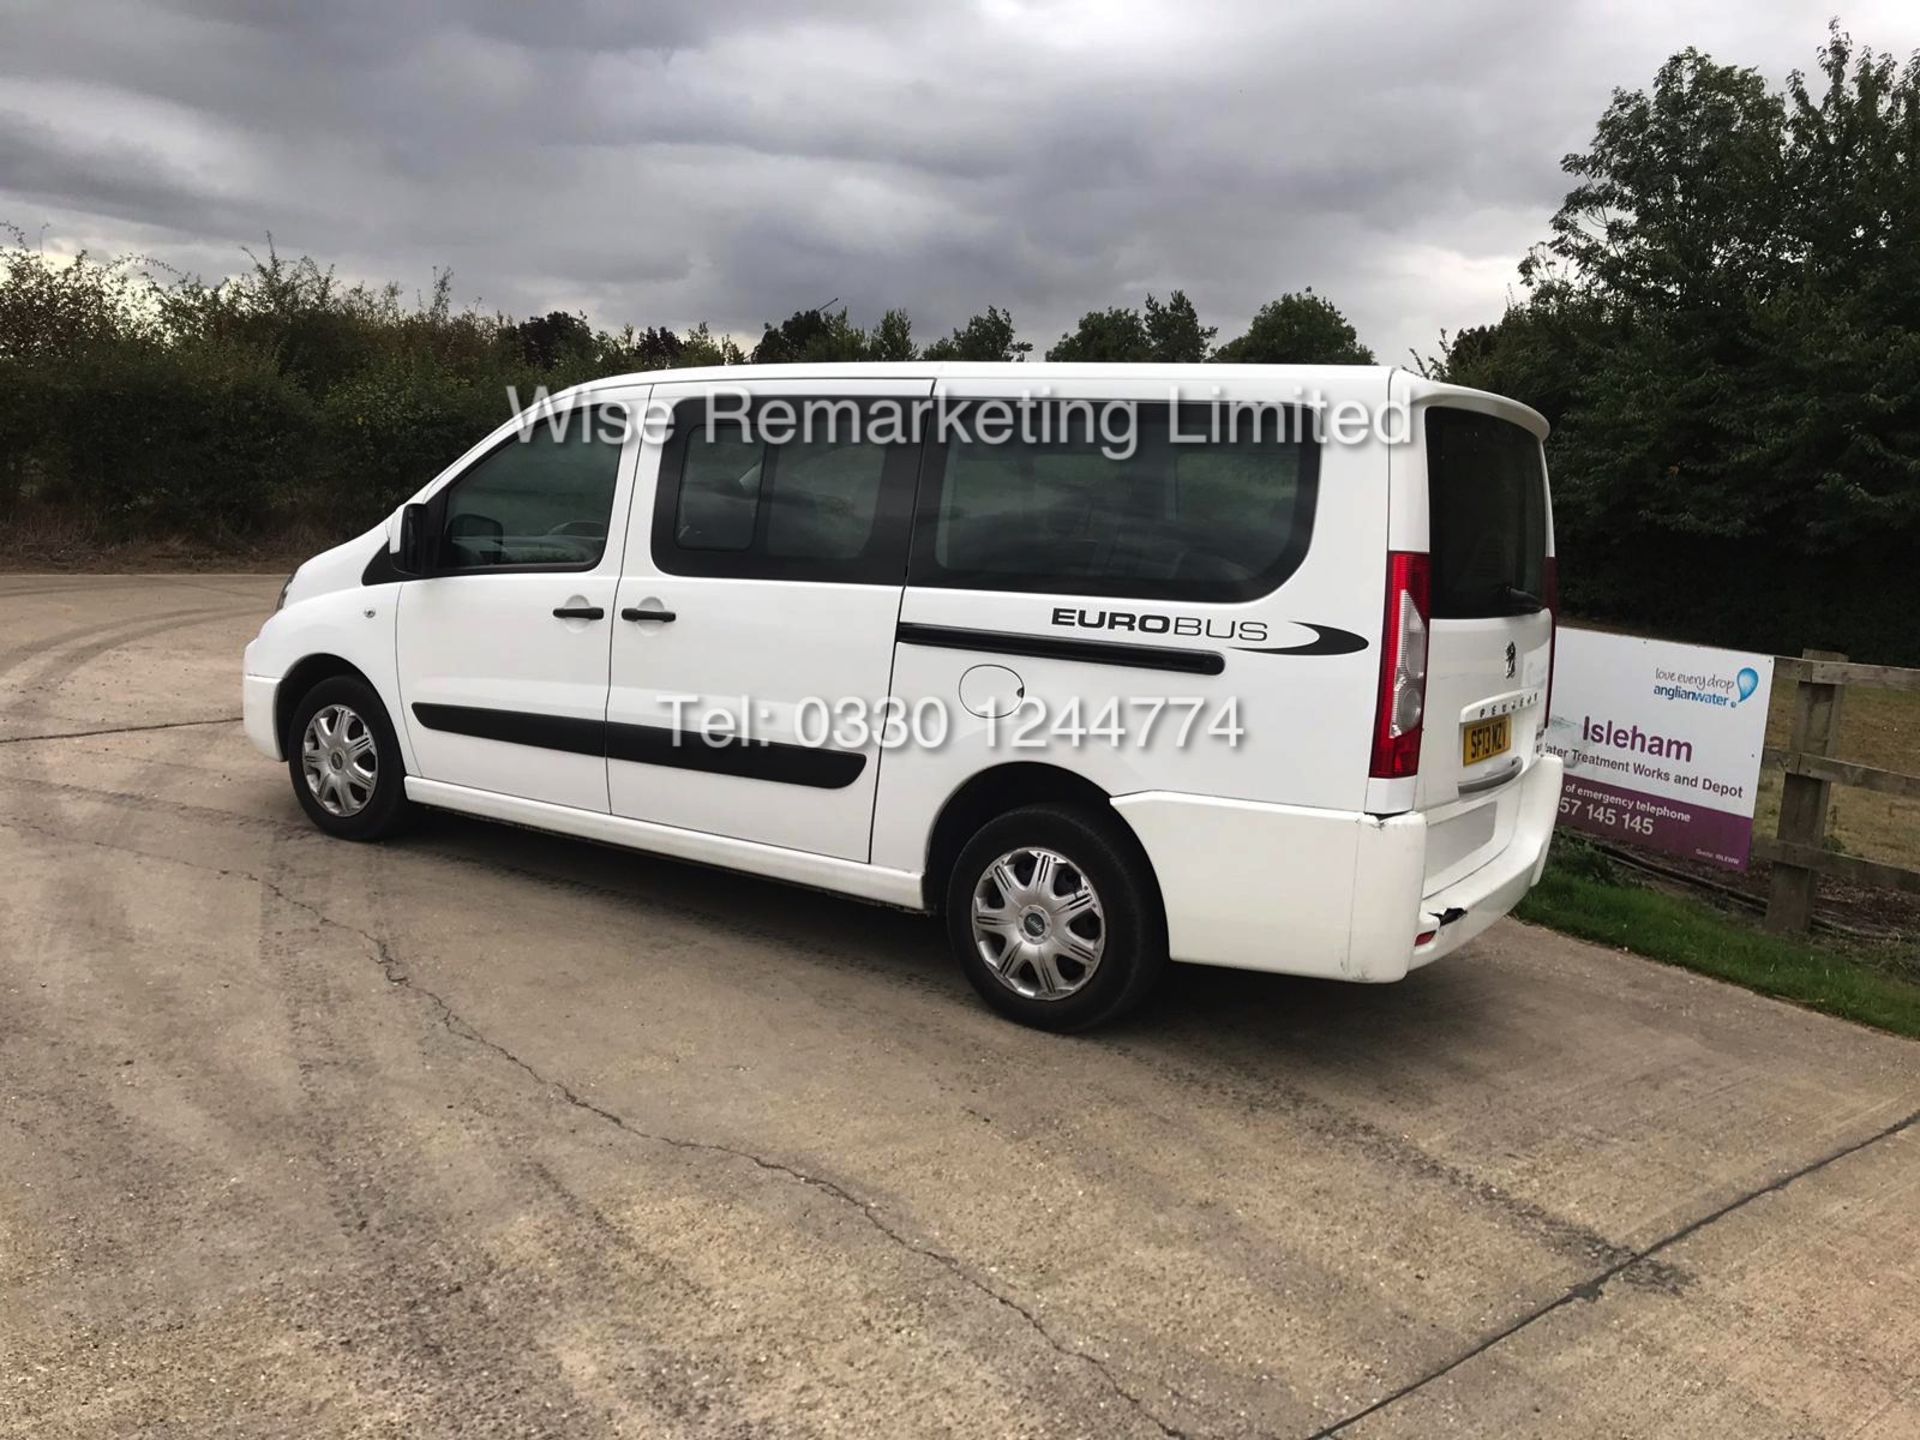 PEUGEOT EUROBUS S *MPV 8 SEATER* 2.0l (2013 - 13 REG) **AIR CON** - 1 OWNER FROM NEW - Image 3 of 19